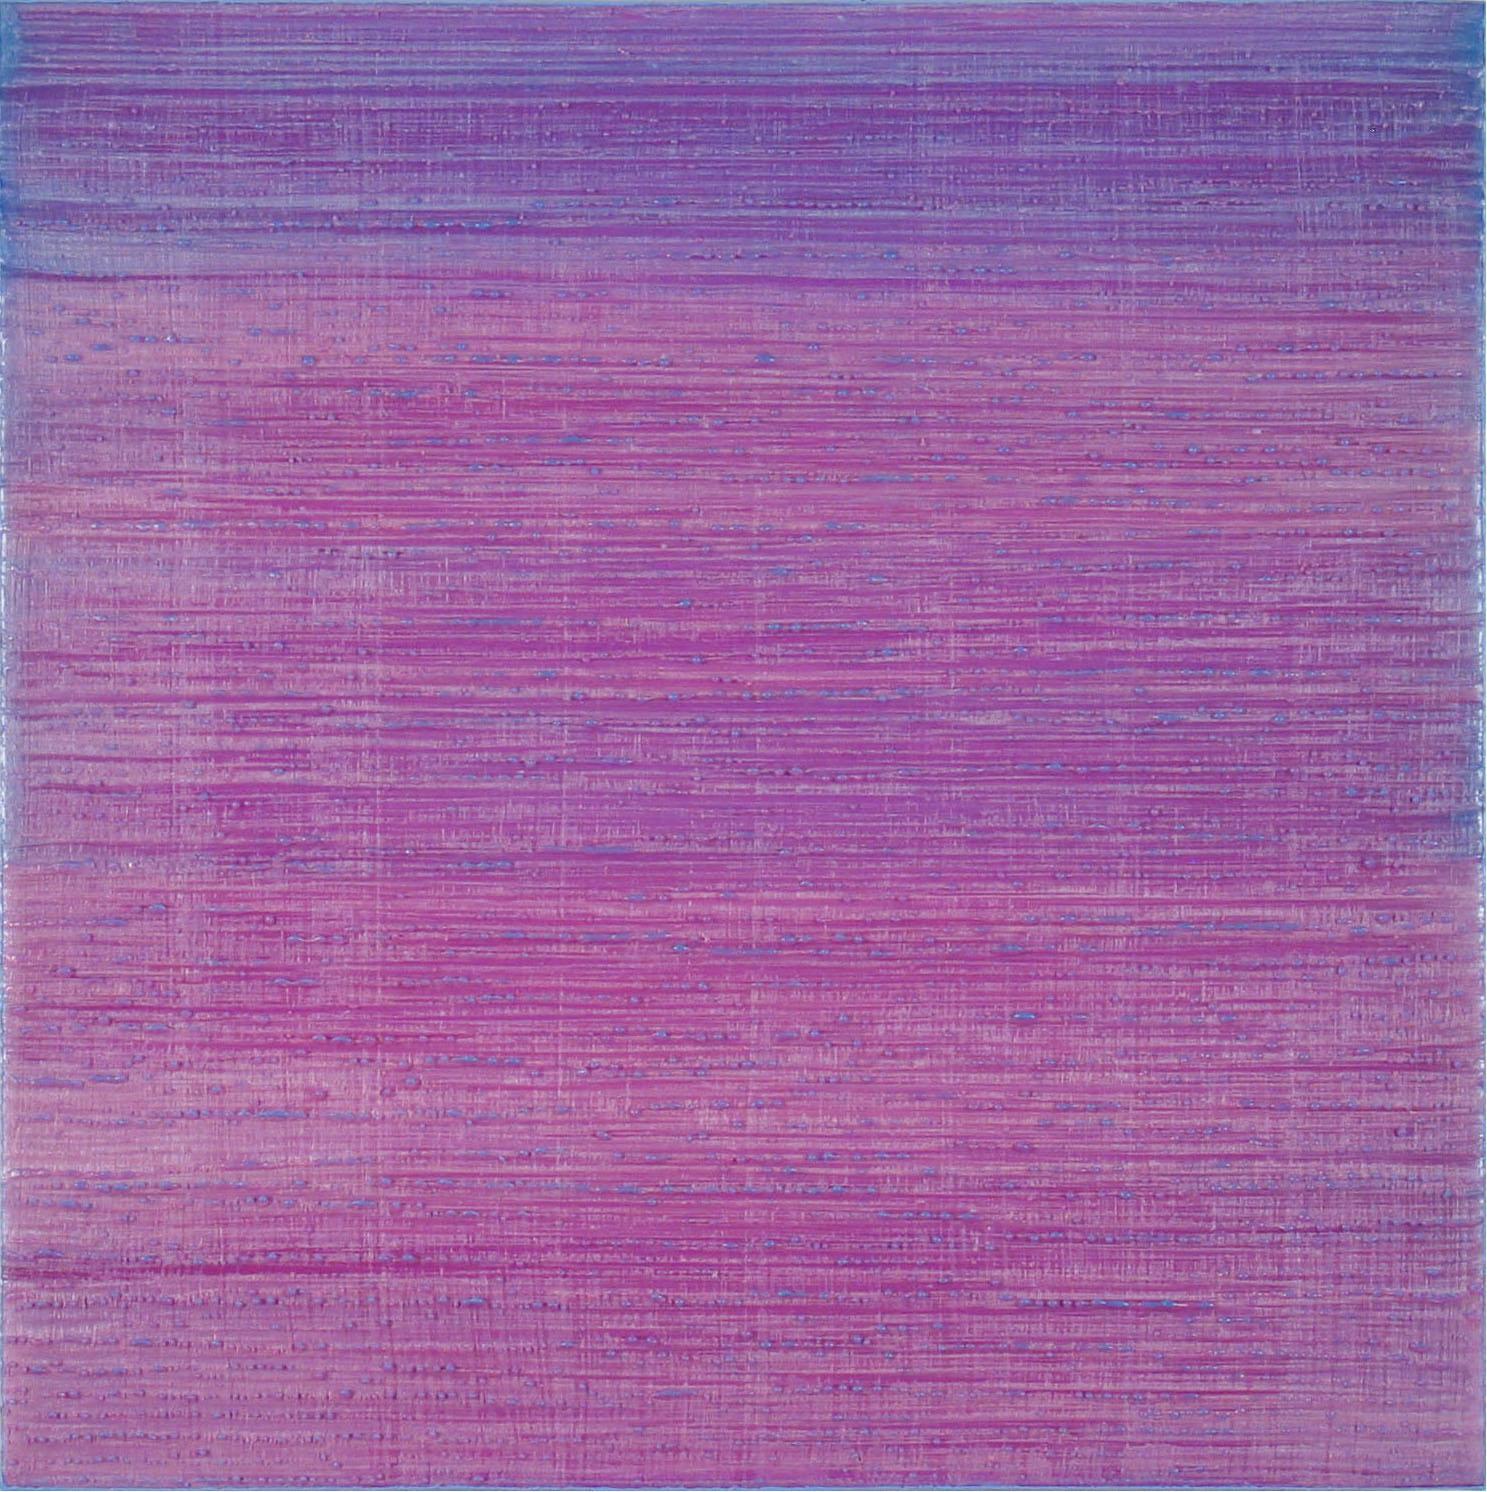 Vibrant purple and lavender encaustic (pigmented beeswax) painting on birch panel accented with bright teal blue along the edge. Signed, dated and titled on verso.

Joanne Mattera’s paintings can be described as lush minimalism, the work is